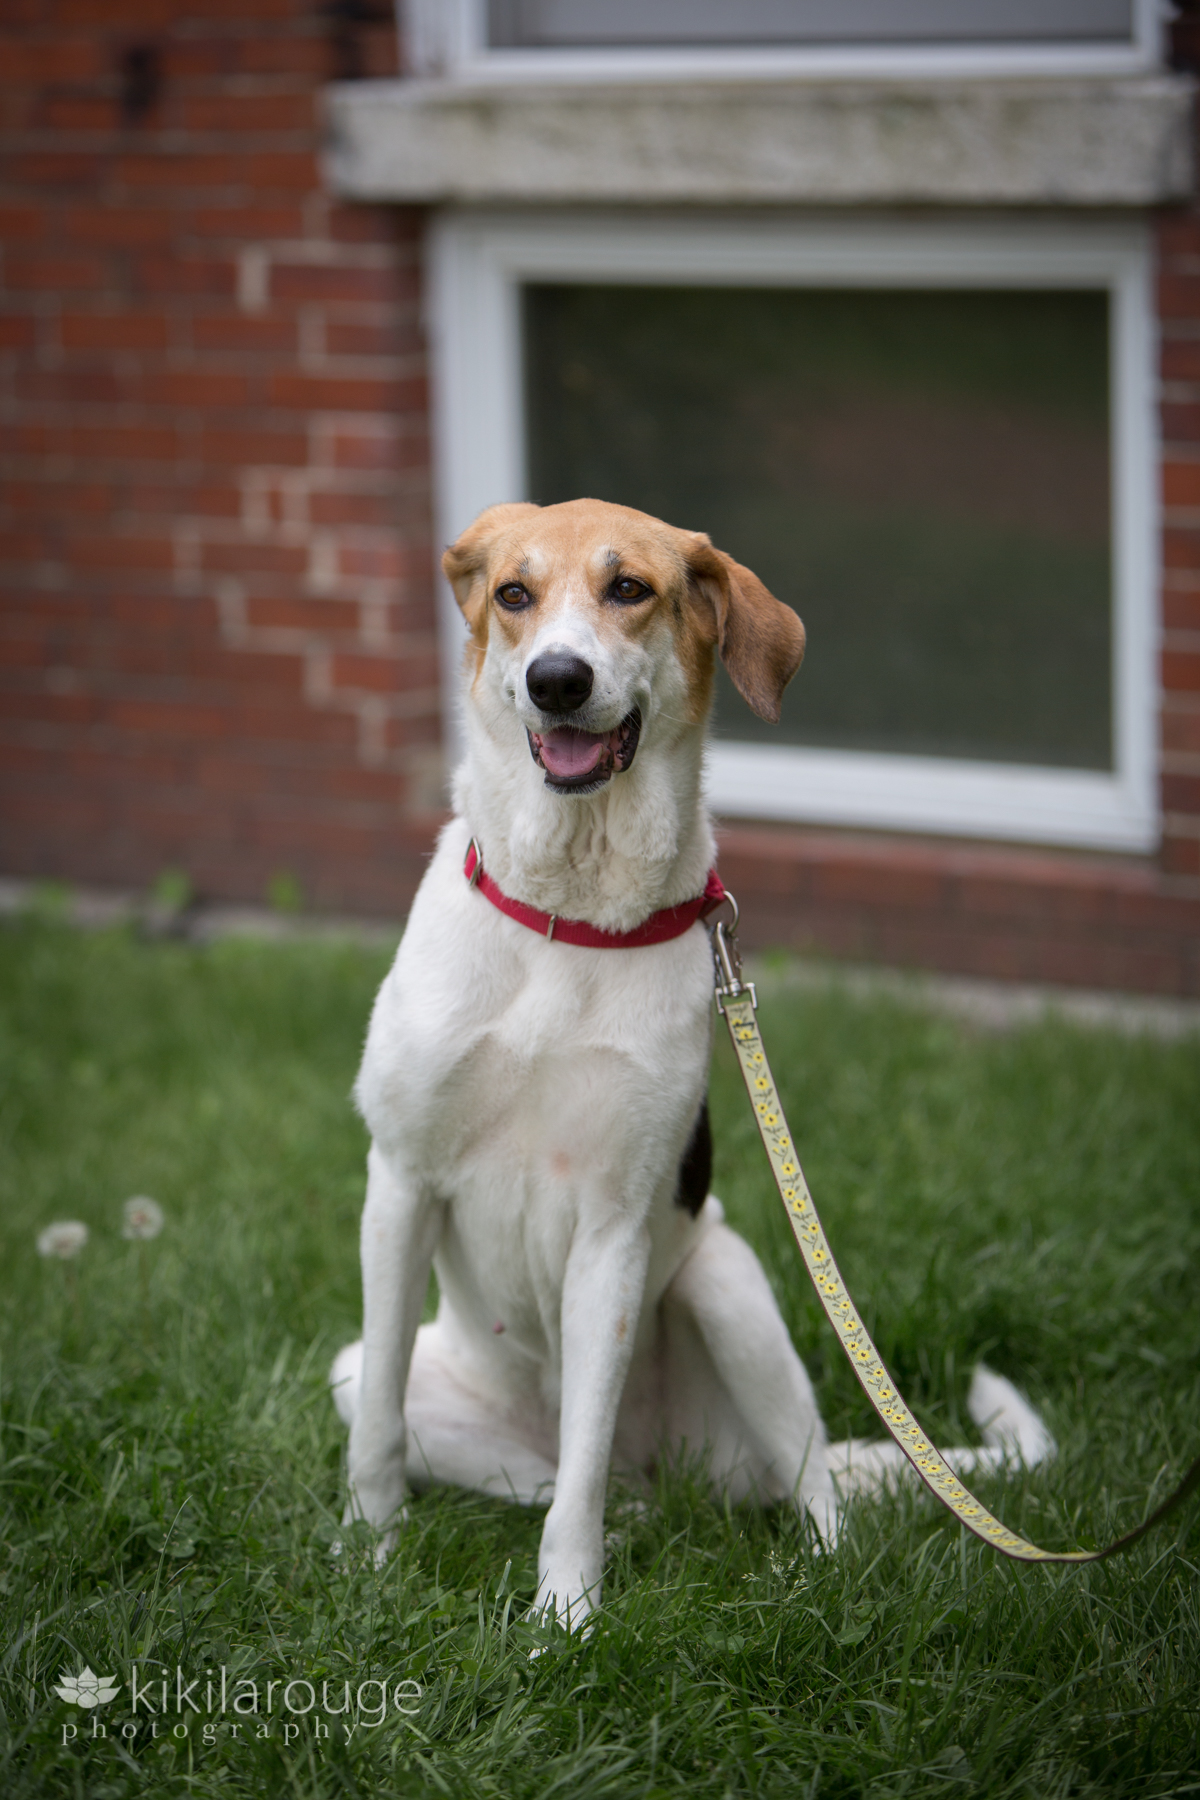 White and beige coonhound rescue mix with red collar sitting in grass with brick wall